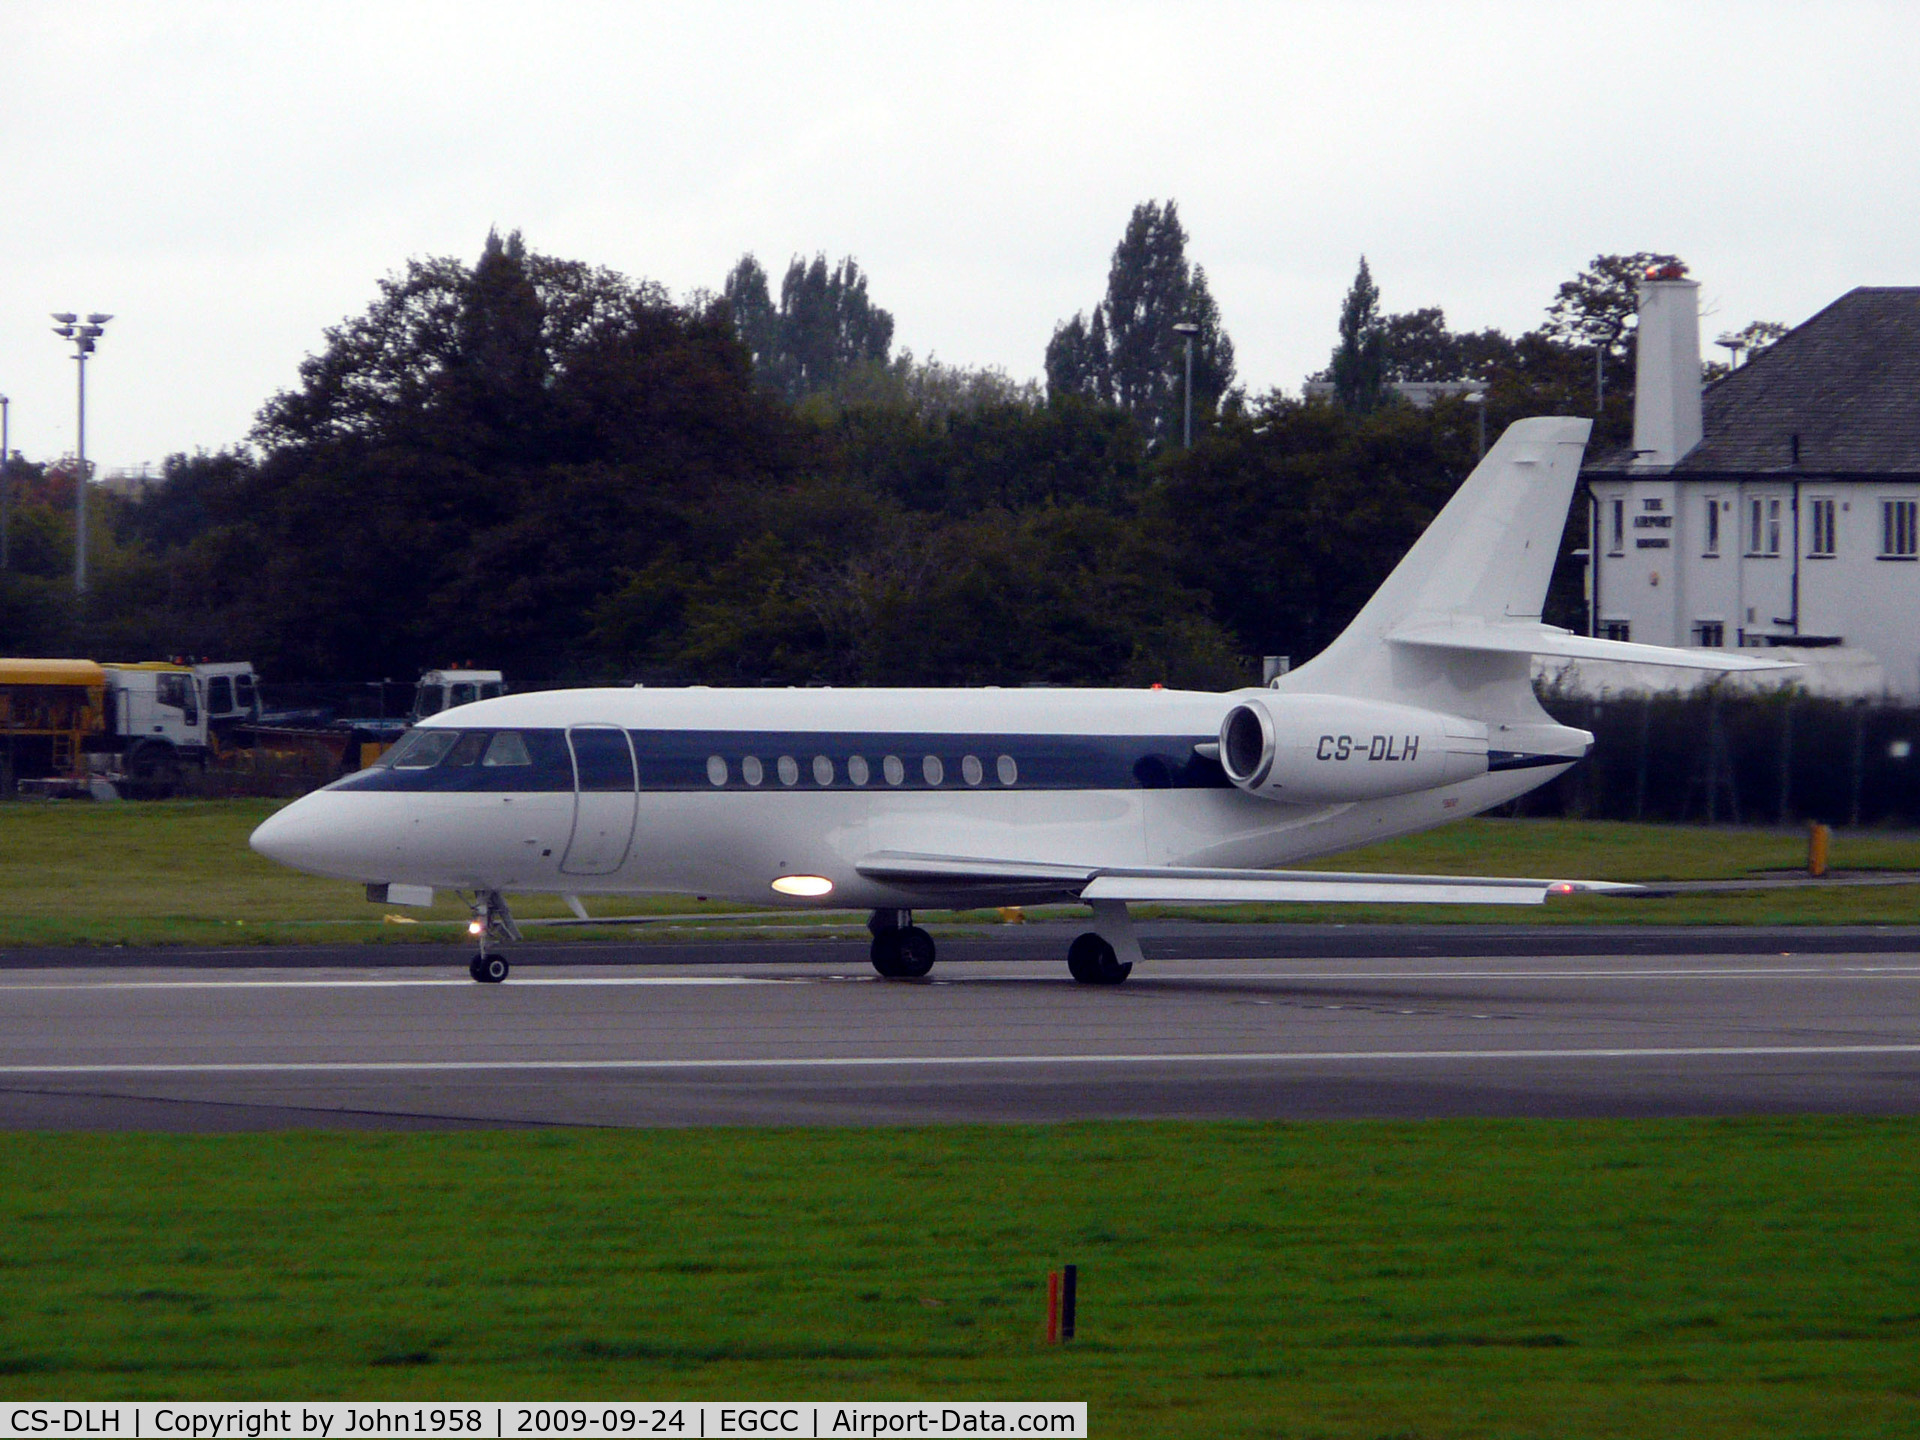 CS-DLH, 2007 Dassault Falcon 2000EX C/N 149, Lined up for departure